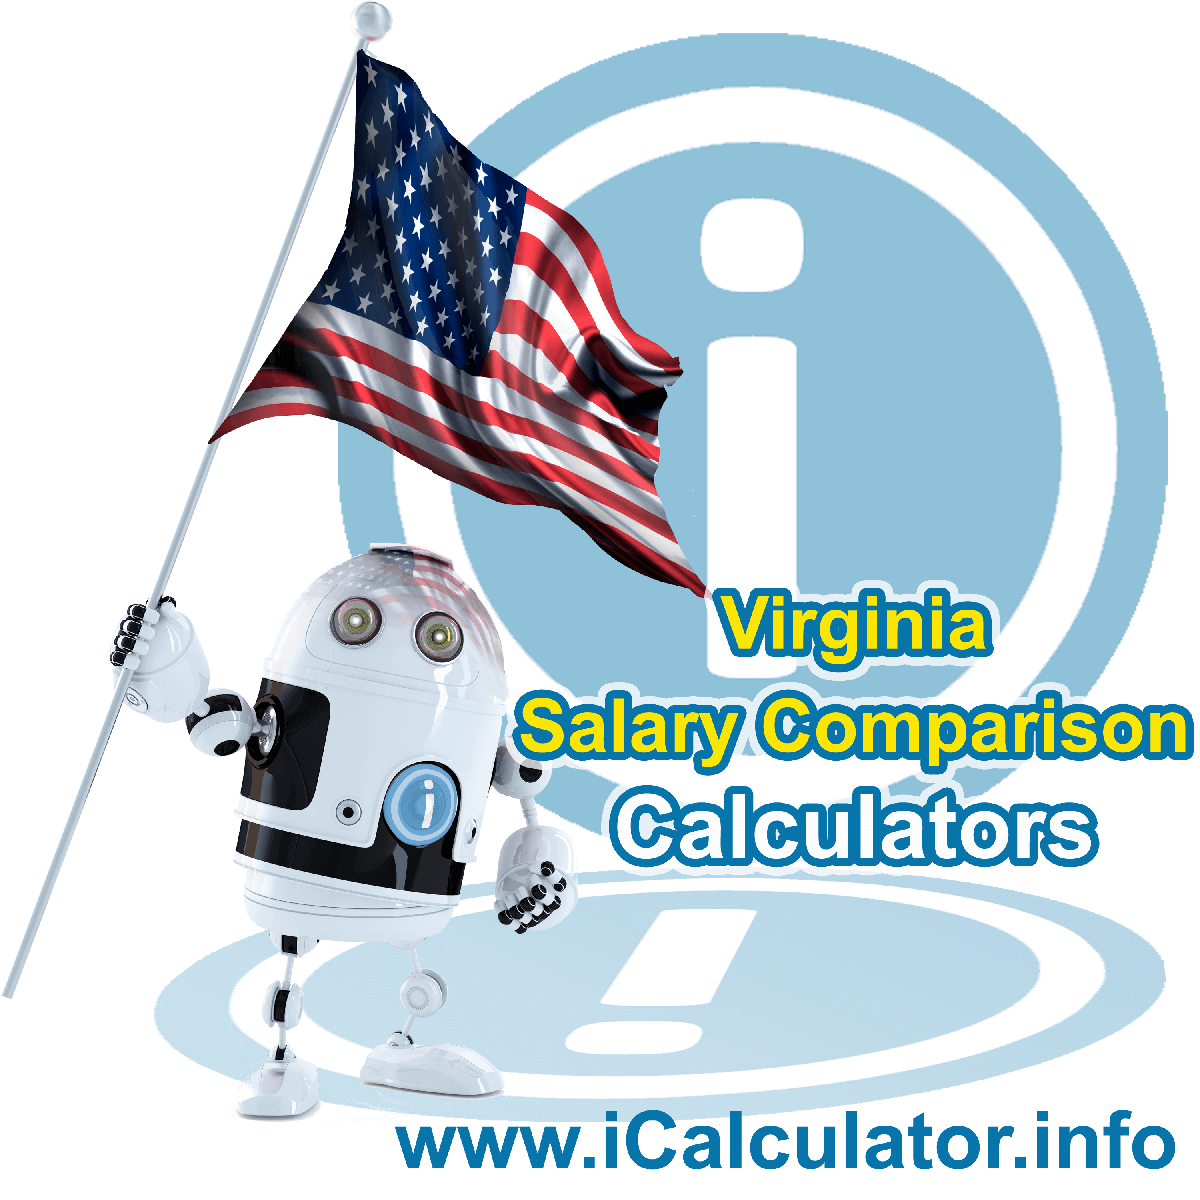 Virginia Salary Comparison Calculator 2023 | iCalculator™ | The Virginia Salary Comparison Calculator allows you to quickly calculate and compare upto 6 salaries in Virginia or compare with other states for the 2023 tax year and historical tax years. 